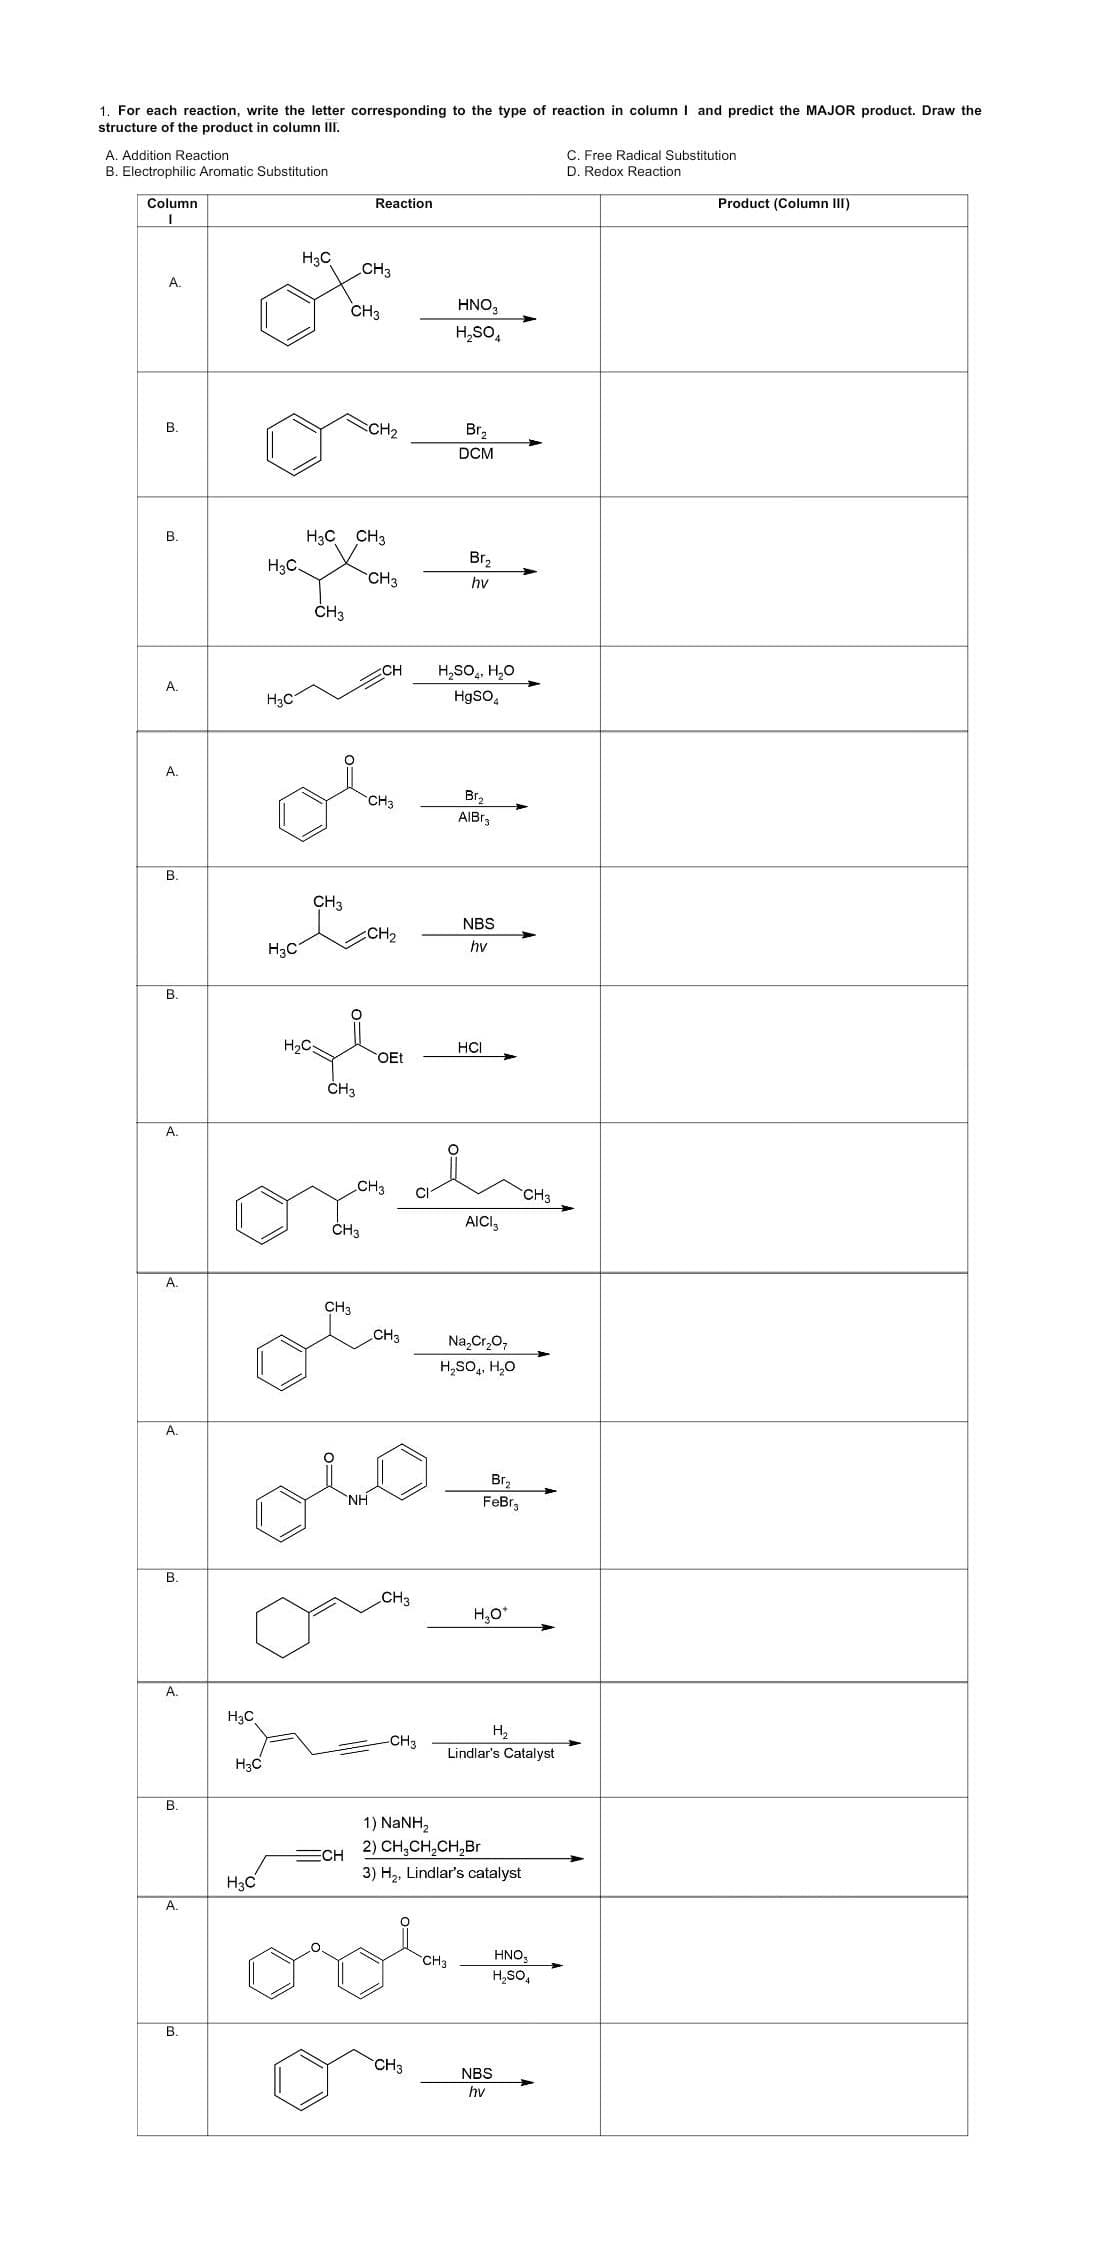 1. For each reaction, write the letter corresponding to the type of reaction in column I and predict the MAJOR product. Draw the
structure of the product in column III.
A. Addition Reaction
B. Electrophilic Aromatic Substitution
Column
I
A.
B.
B.
A.
A.
B.
B.
A.
A.
A.
B.
A.
B.
A.
B.
H₂C
H3C
H3C.
H3C
H3C
H3C
H3C
H₂C
CH3
CH3
H3C CH3
Reaction
CH3
CH3
CH3
CH₂
ECH
CH3
CH
CH3
l
CH3
CH₂
oso
NH
OEt
CH3
CH3
orada
CH3
CH3
-CH3
HNO3
H₂SO4
CH3
Br₂
DCM
Br₂
hv
H₂SO₂, H₂O
HgSO4
Br₂
AlBr
CH3
NBS
hv
HCI
AICI
Na₂Cr₂O7
H₂SO4, H₂O
Br₂
FeBr
H₂O*
H₂
Lindlar's Catalyst
1) NaNH,
2) CH₂CH₂CH₂Br
3) H₂, Lindlar's catalyst
CH3
NBS
hv
HNO,
H₂SO4
C. Free Radical Substitution
D. Redox Reaction
Product (Column III)